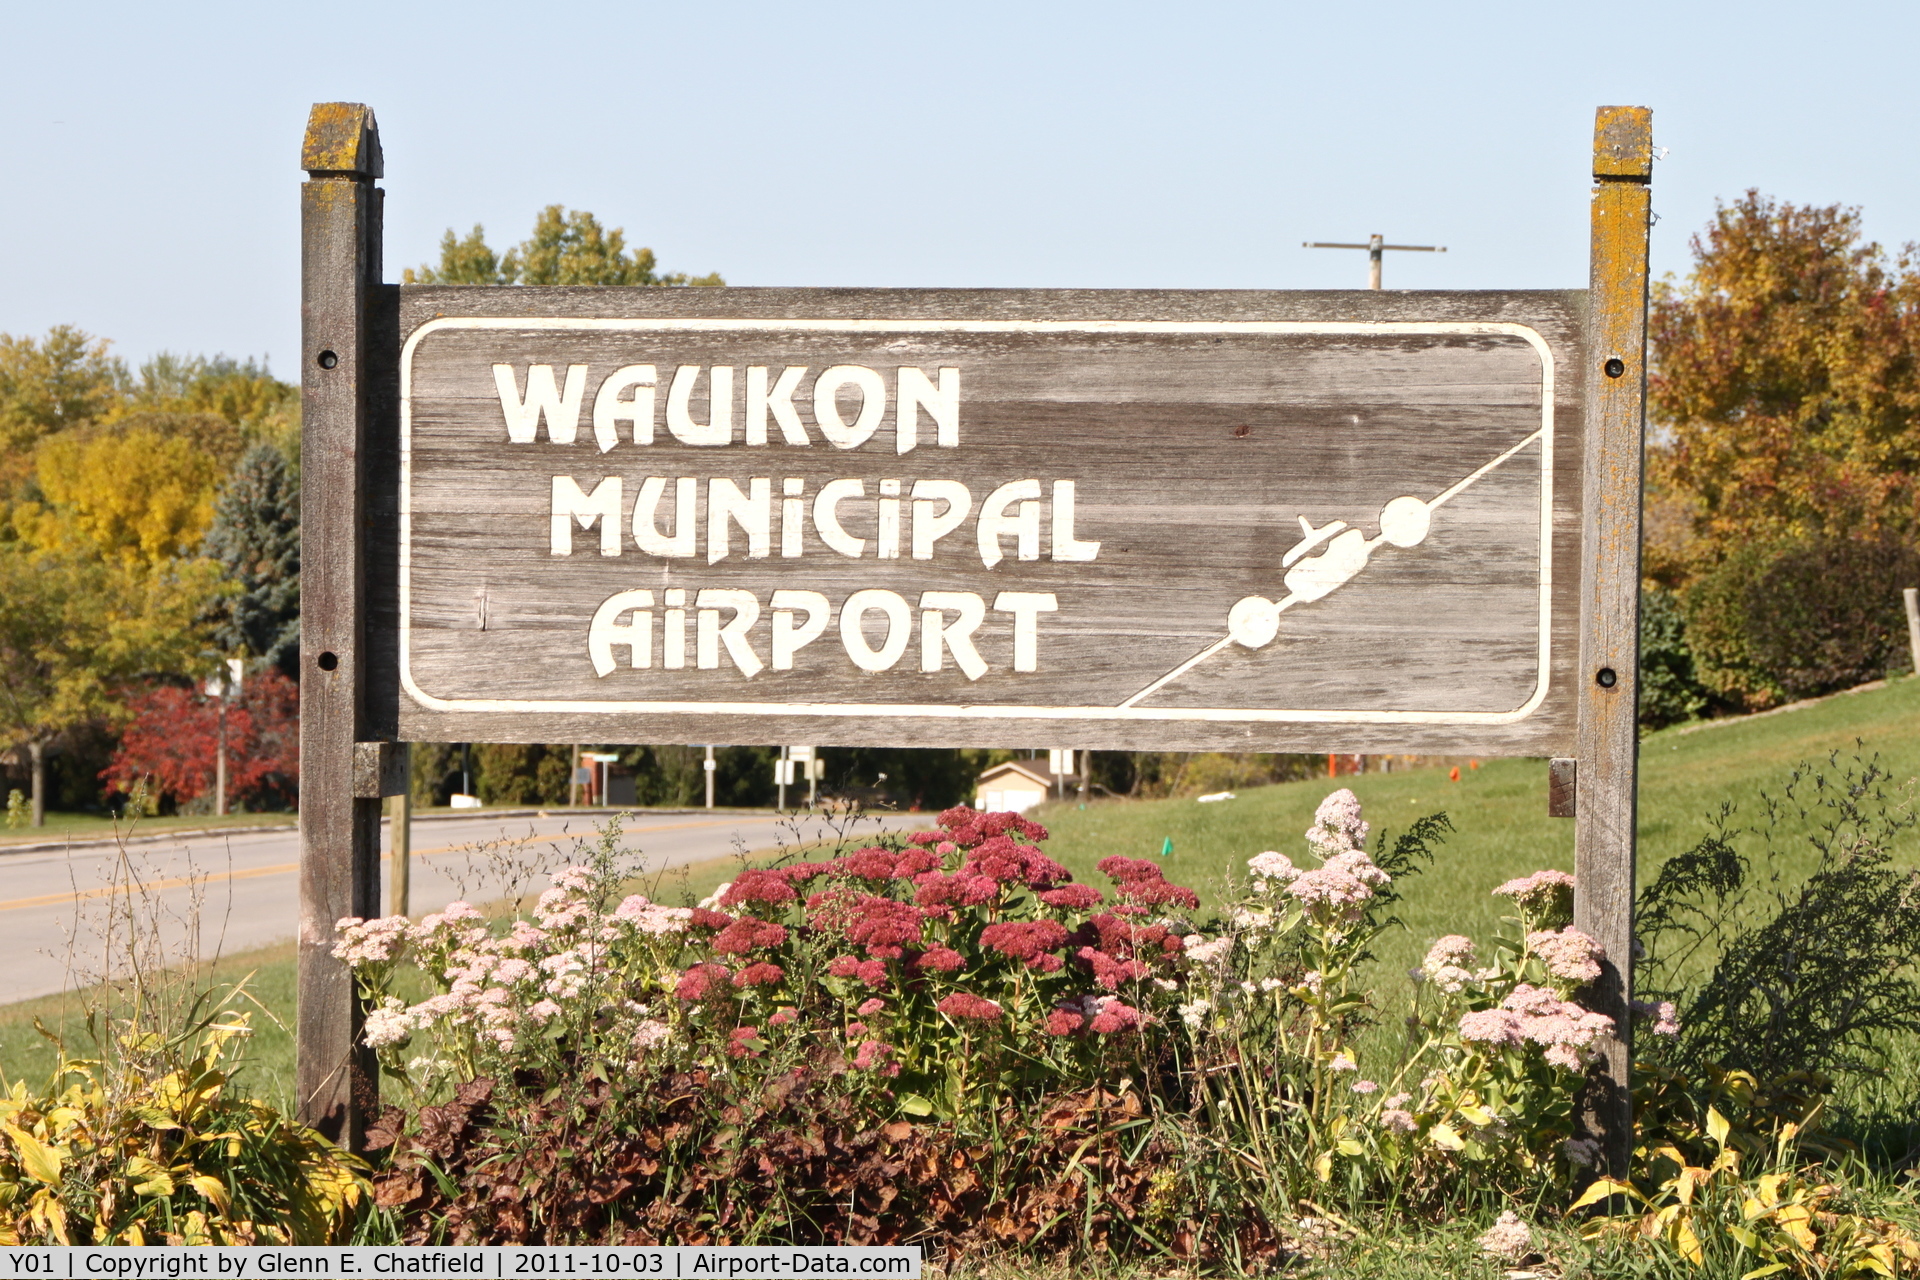 Waukon Municipal Airport (Y01) - Sign at the road